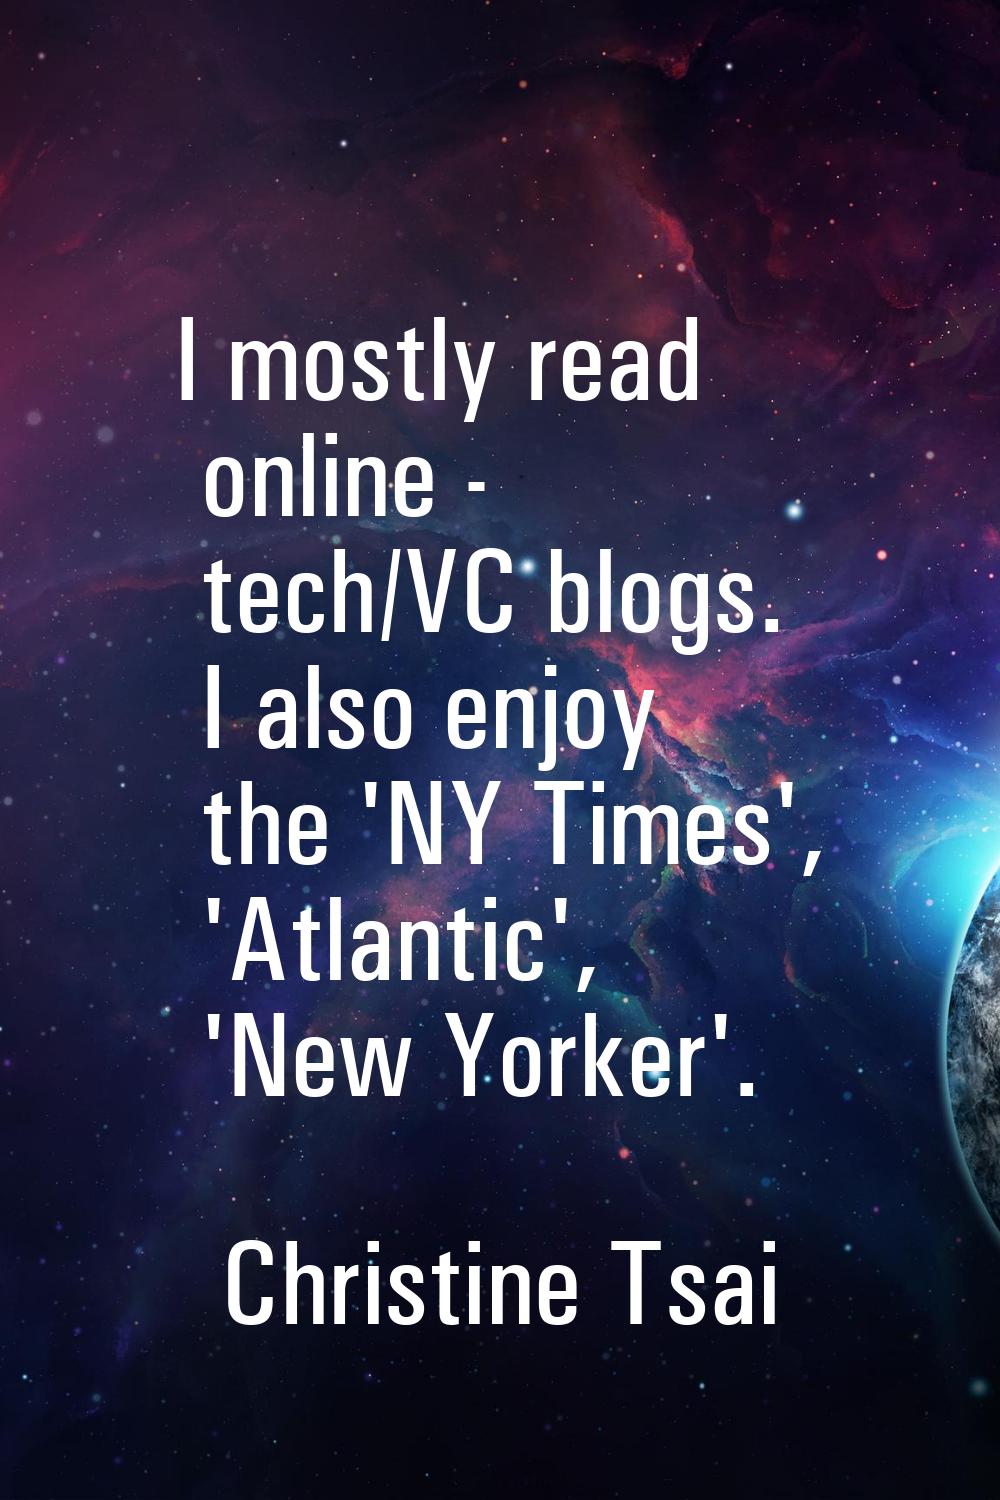 I mostly read online - tech/VC blogs. I also enjoy the 'NY Times', 'Atlantic', 'New Yorker'.